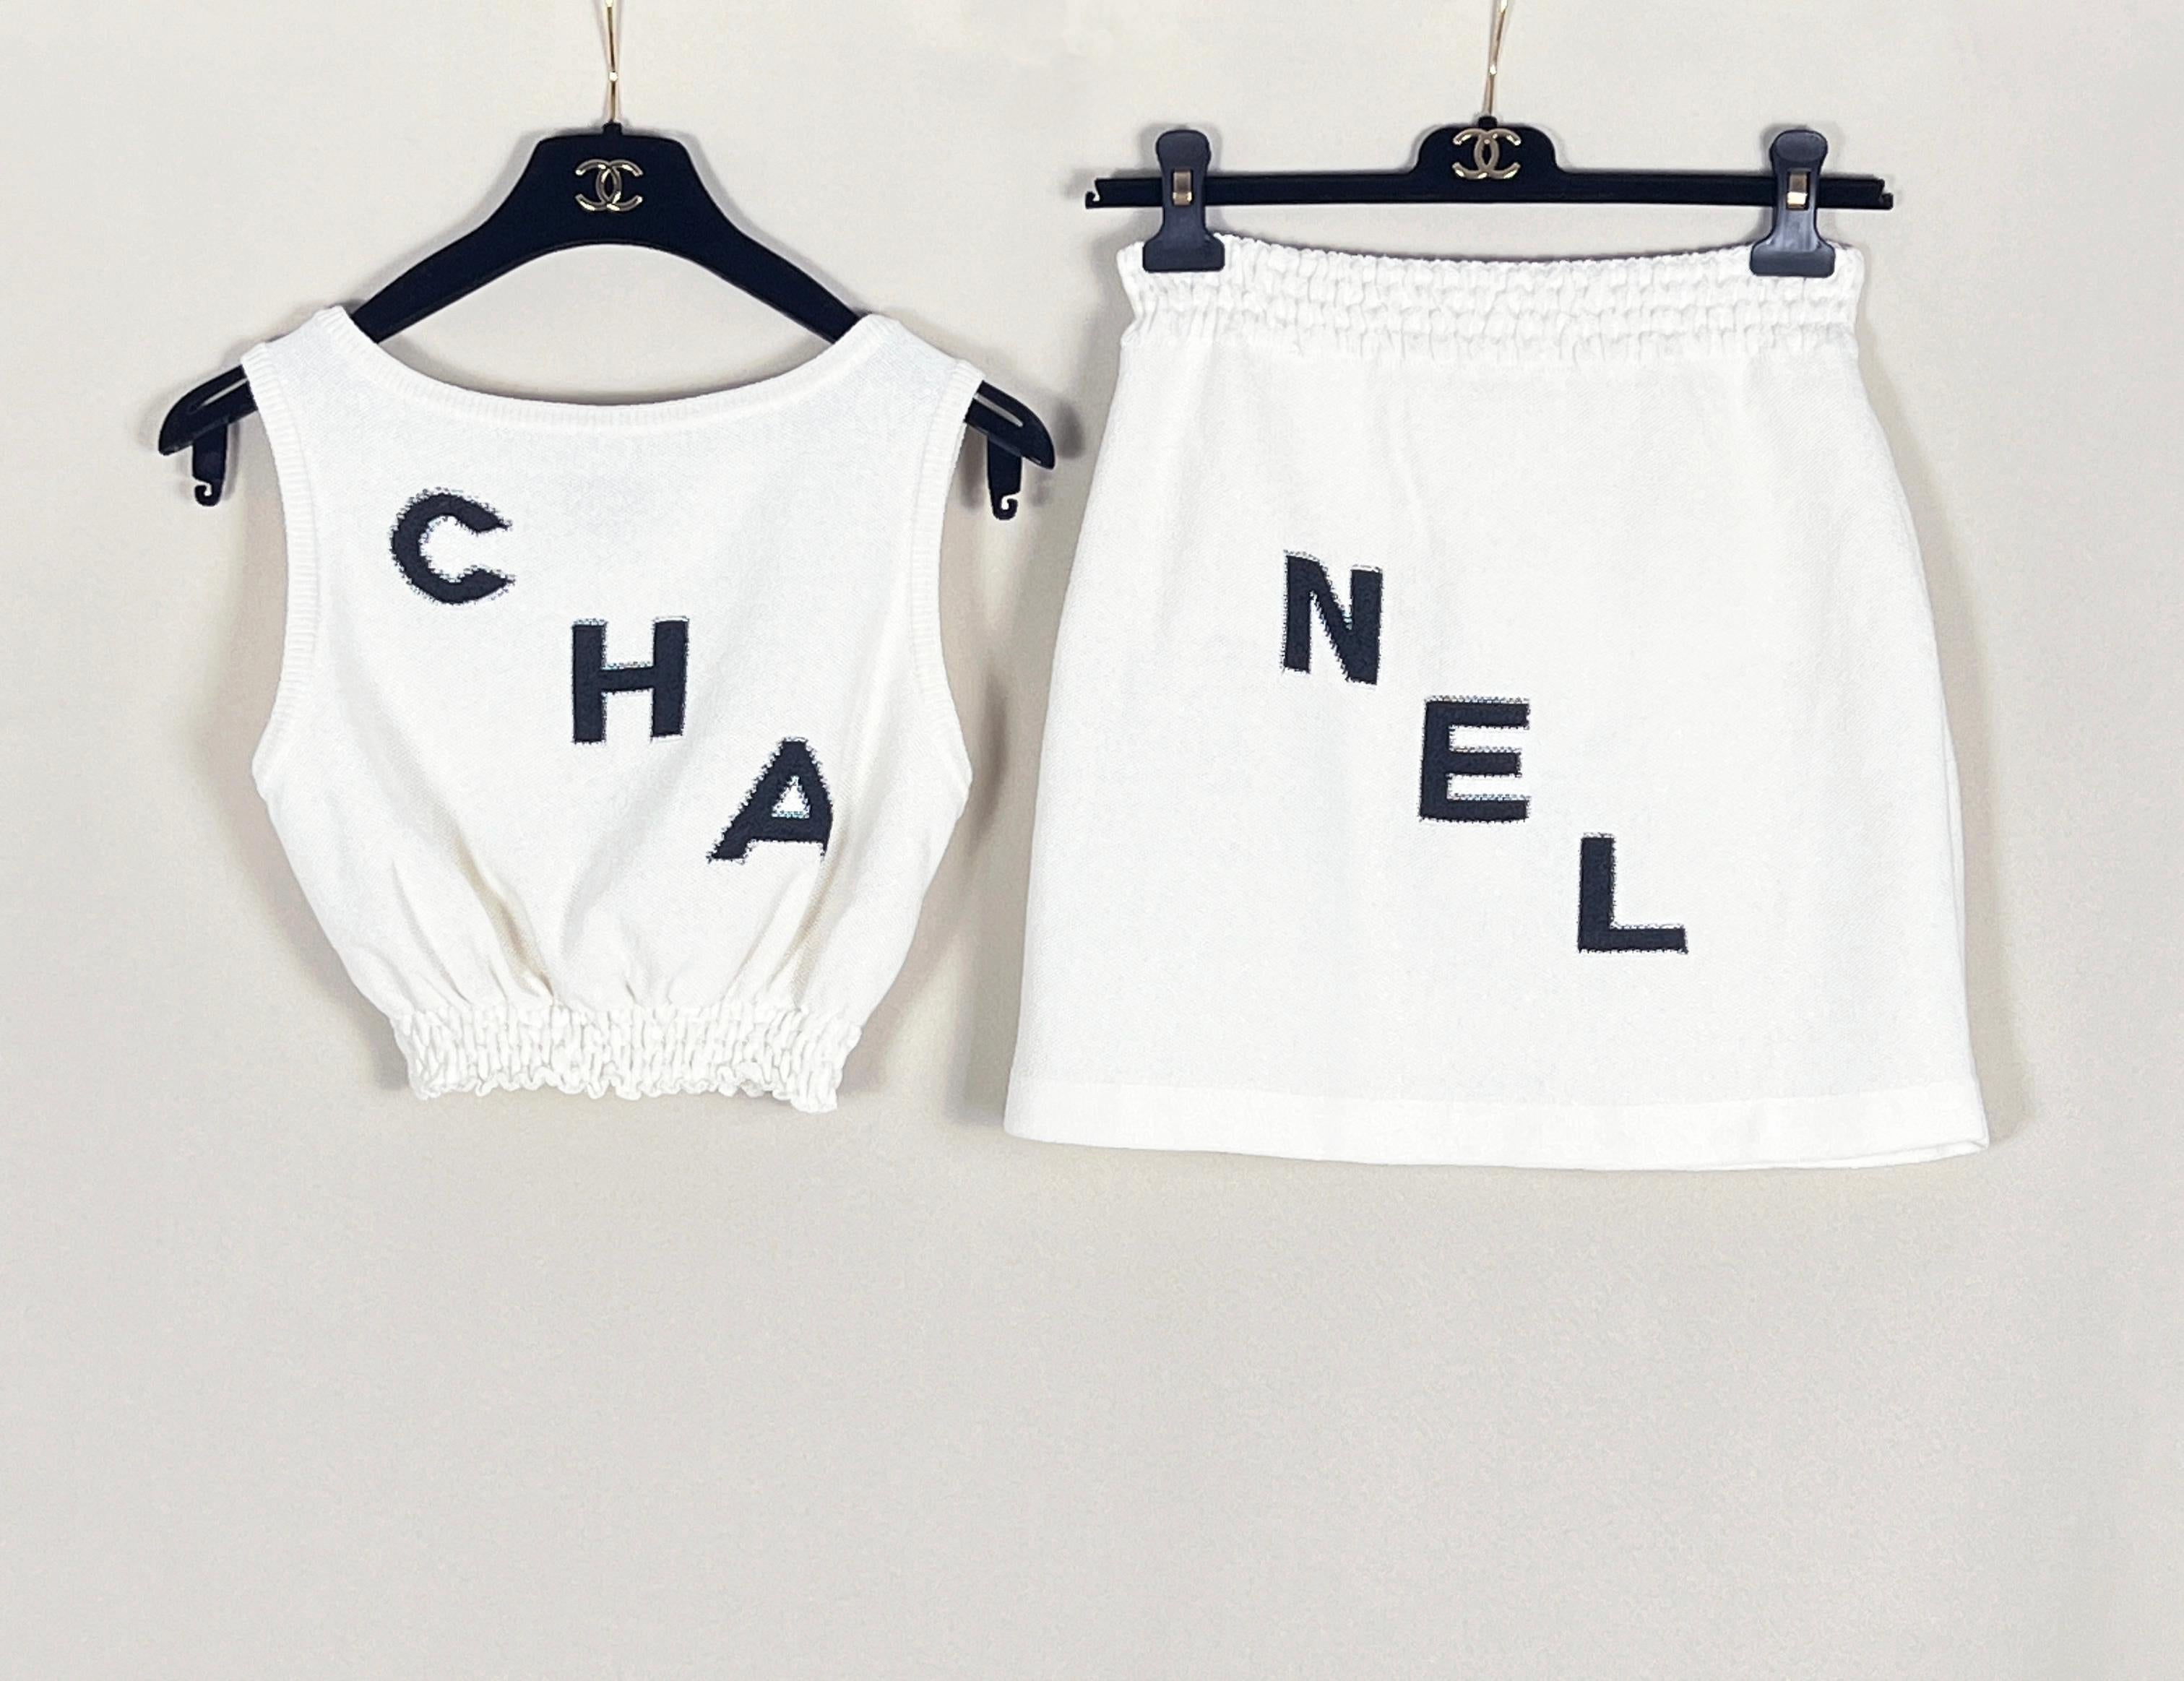 Chanel New Kylie Jenner Style Logo Suit 1